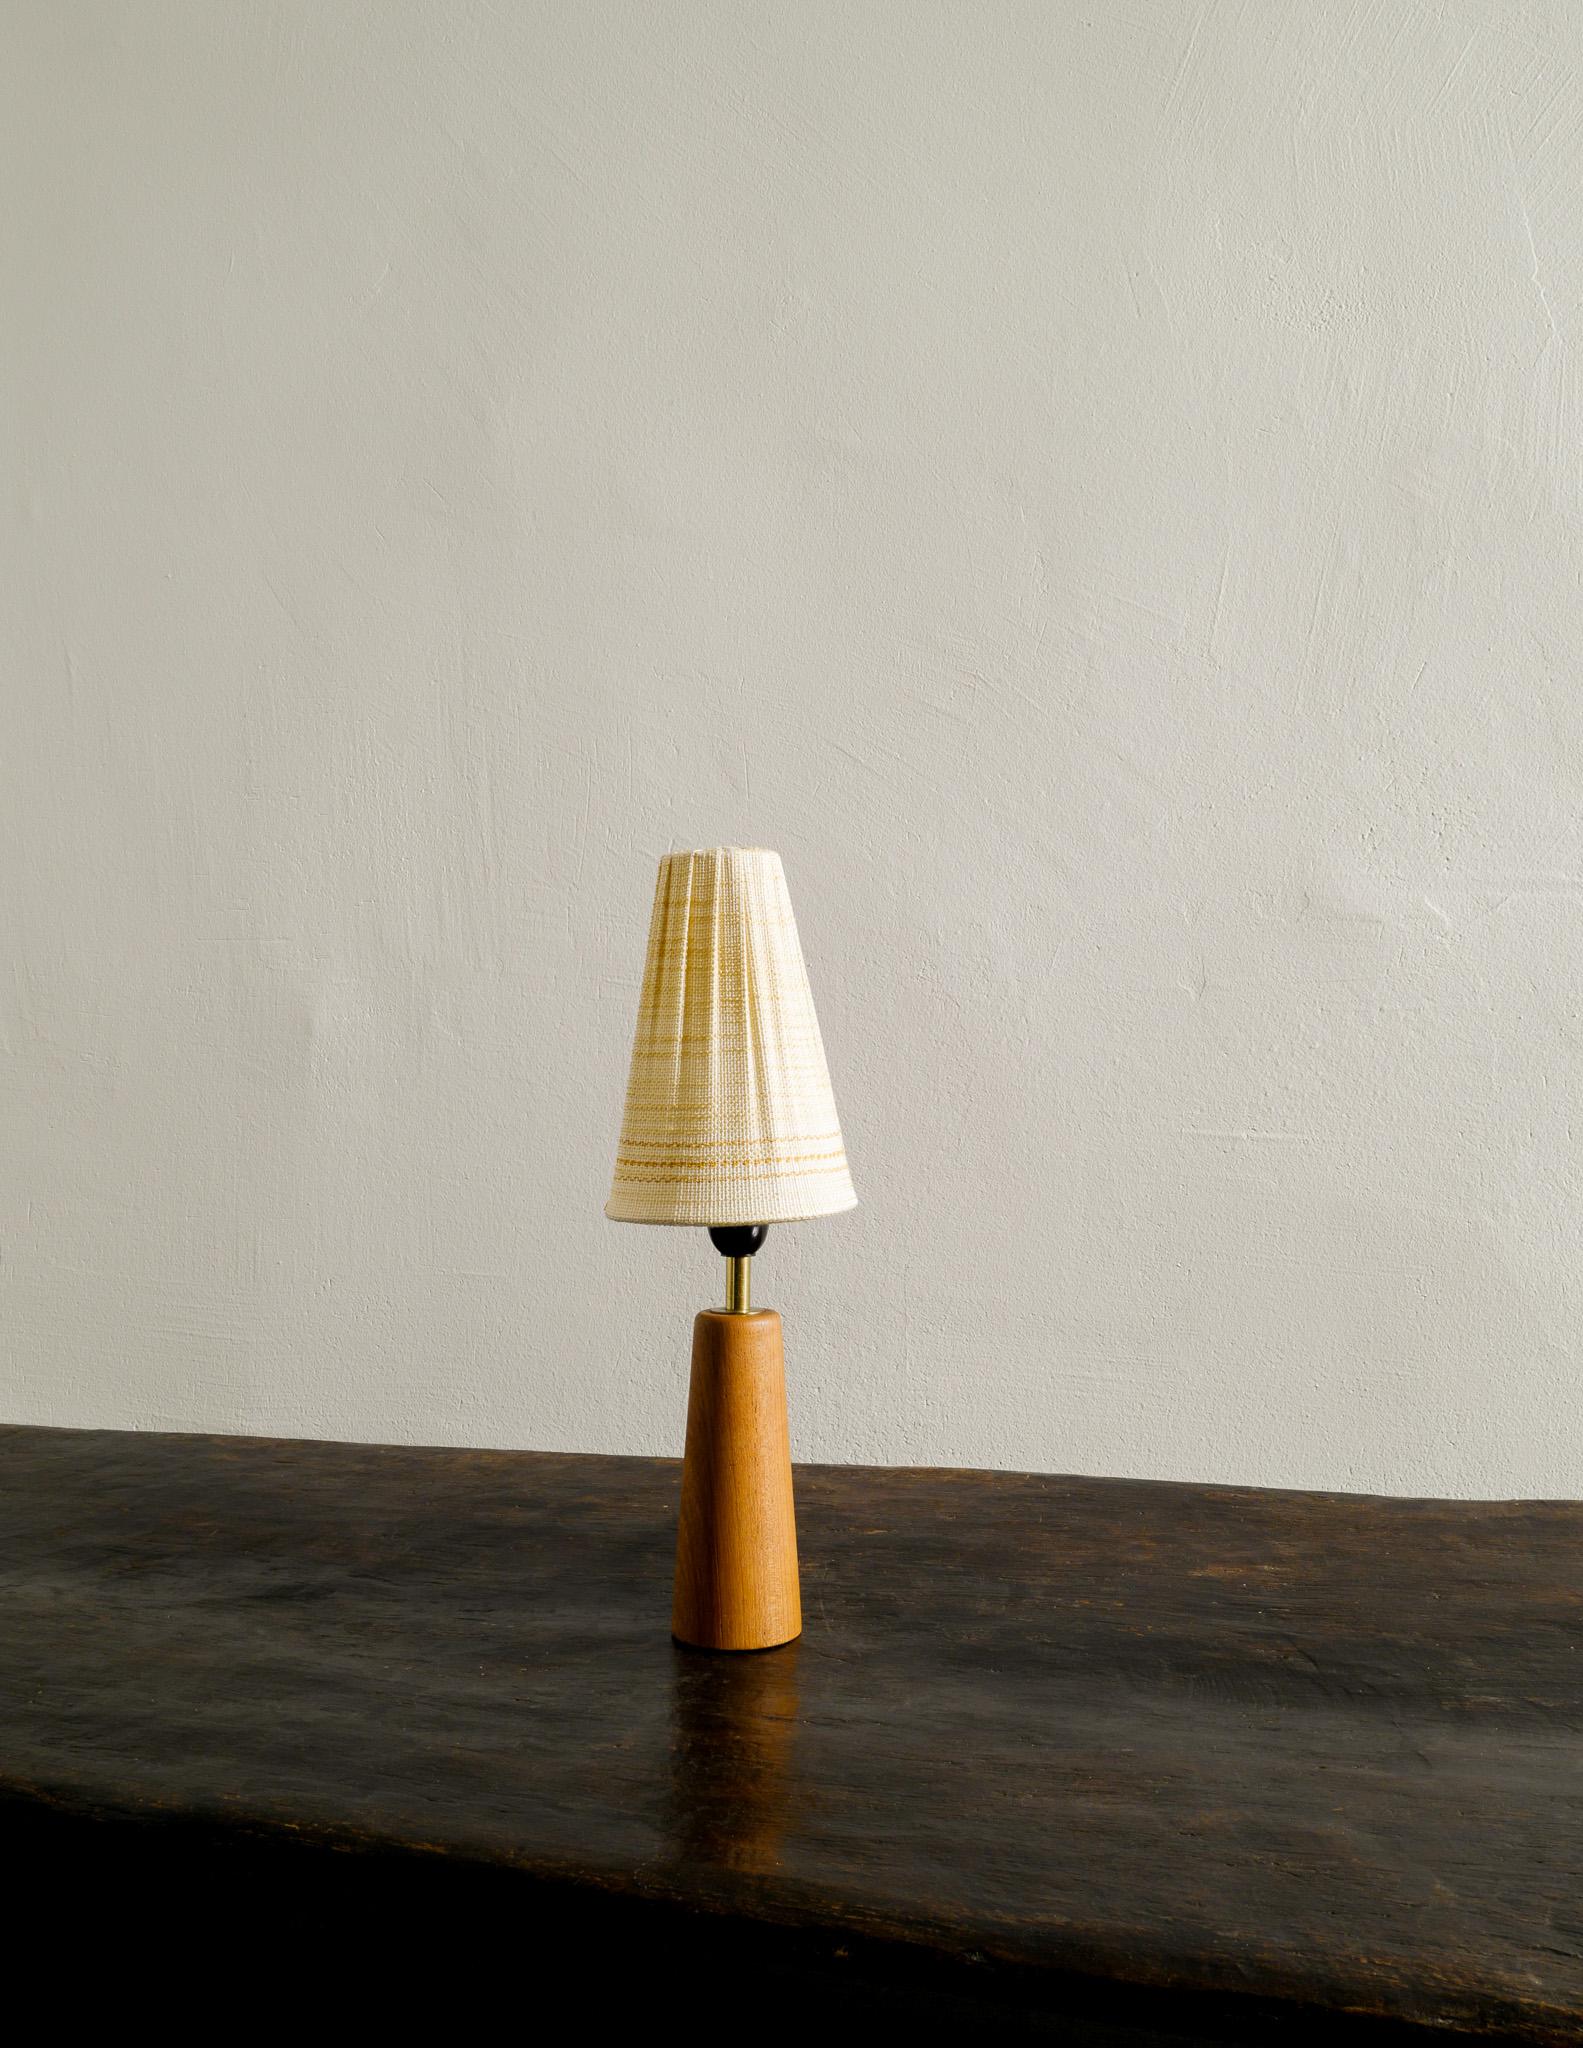 Rare Finnish mid century lamp in teak with original textile fabric shade. Produced in the 1970s and similar in style to Lisa Papé Johansson design. Shade is included. 

Dimensions (including shade): H: 45 cm W/D: 14 cm